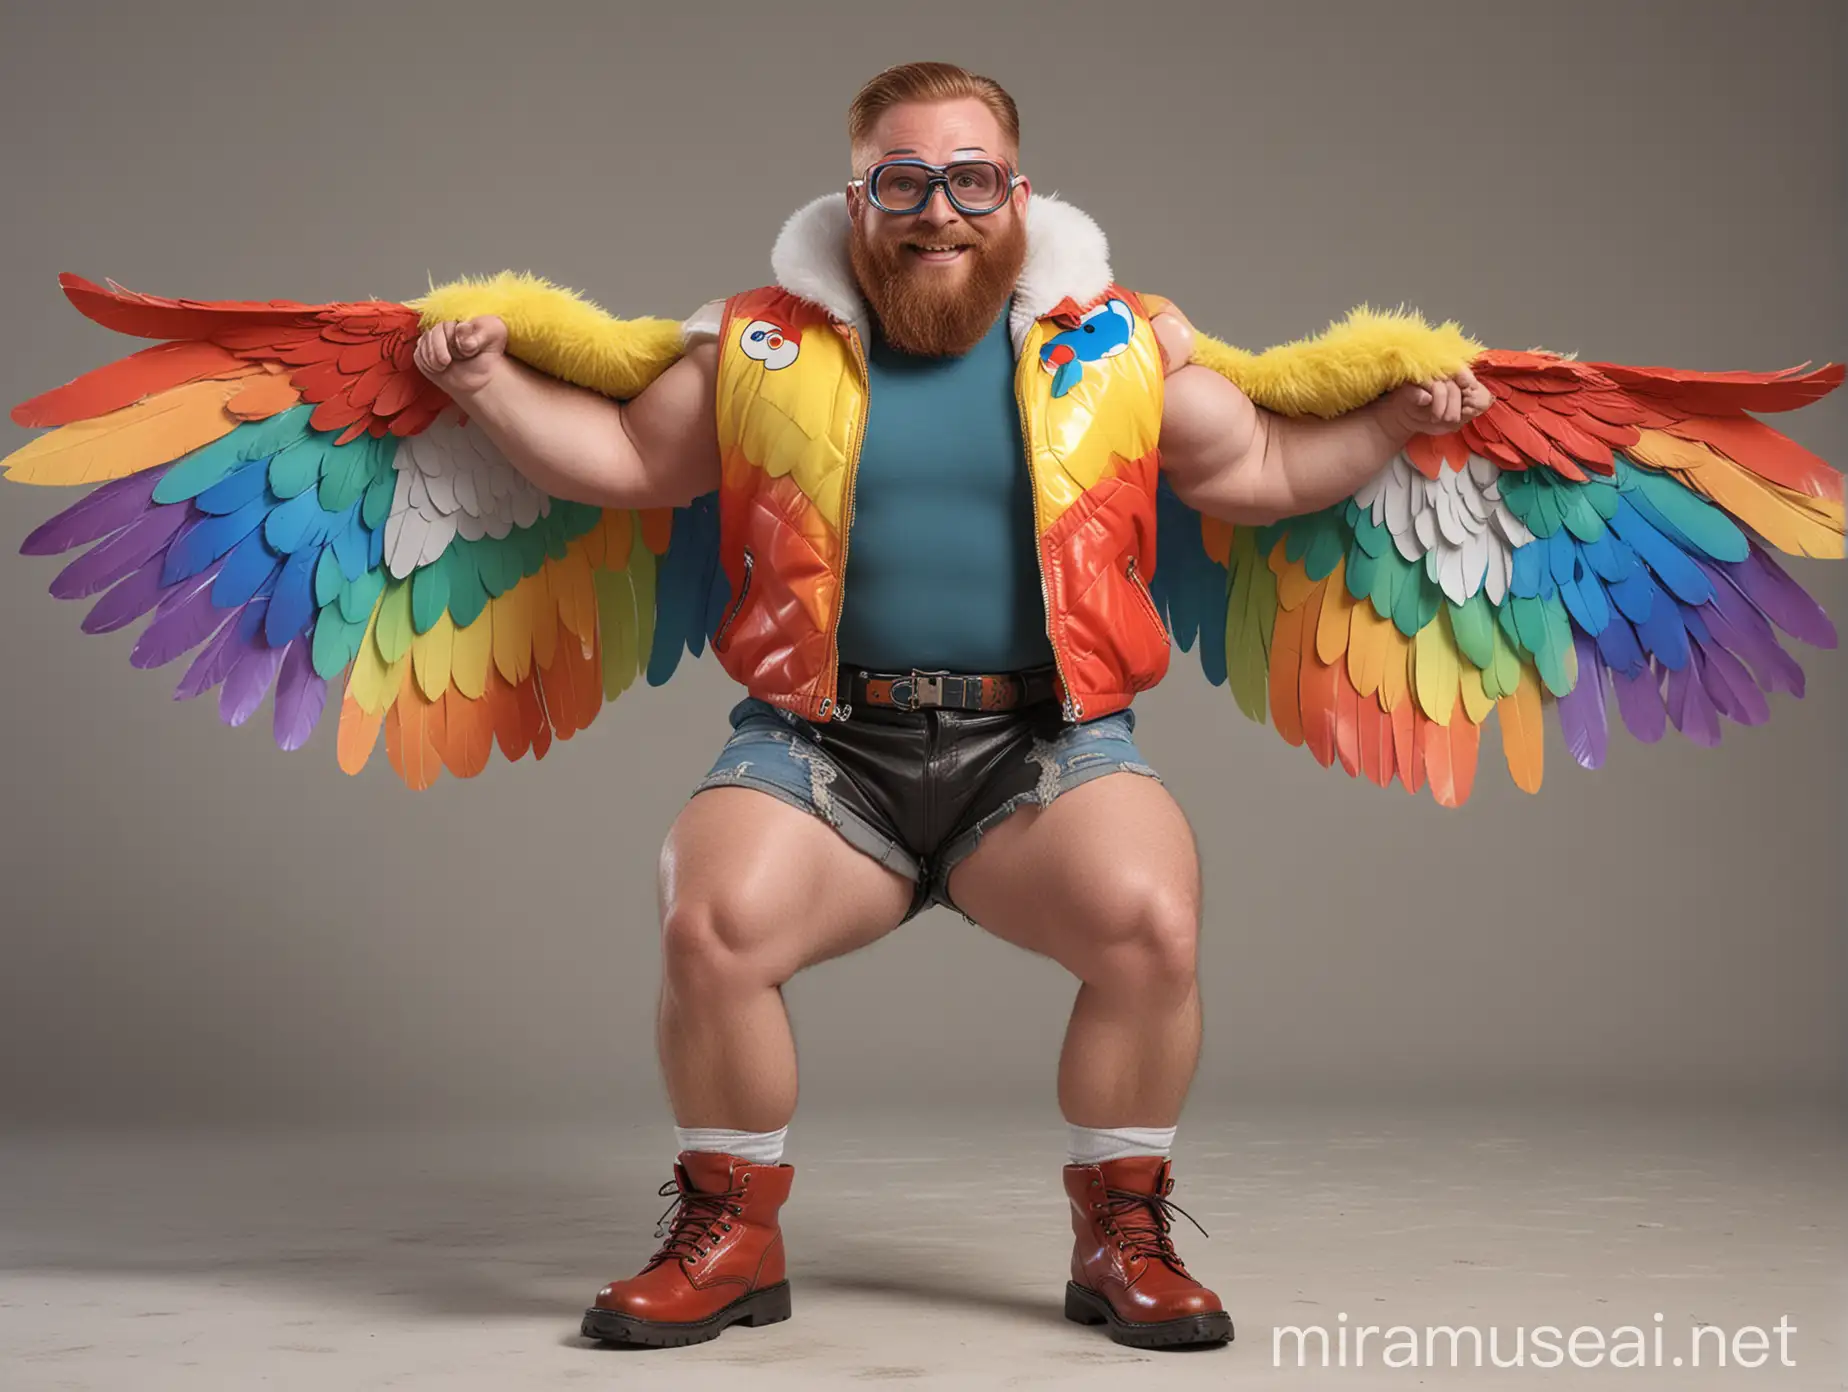 Muscular Redhead Bodybuilder Flexing with Rainbow Eagle Wing Jacket and Doraemon Goggles